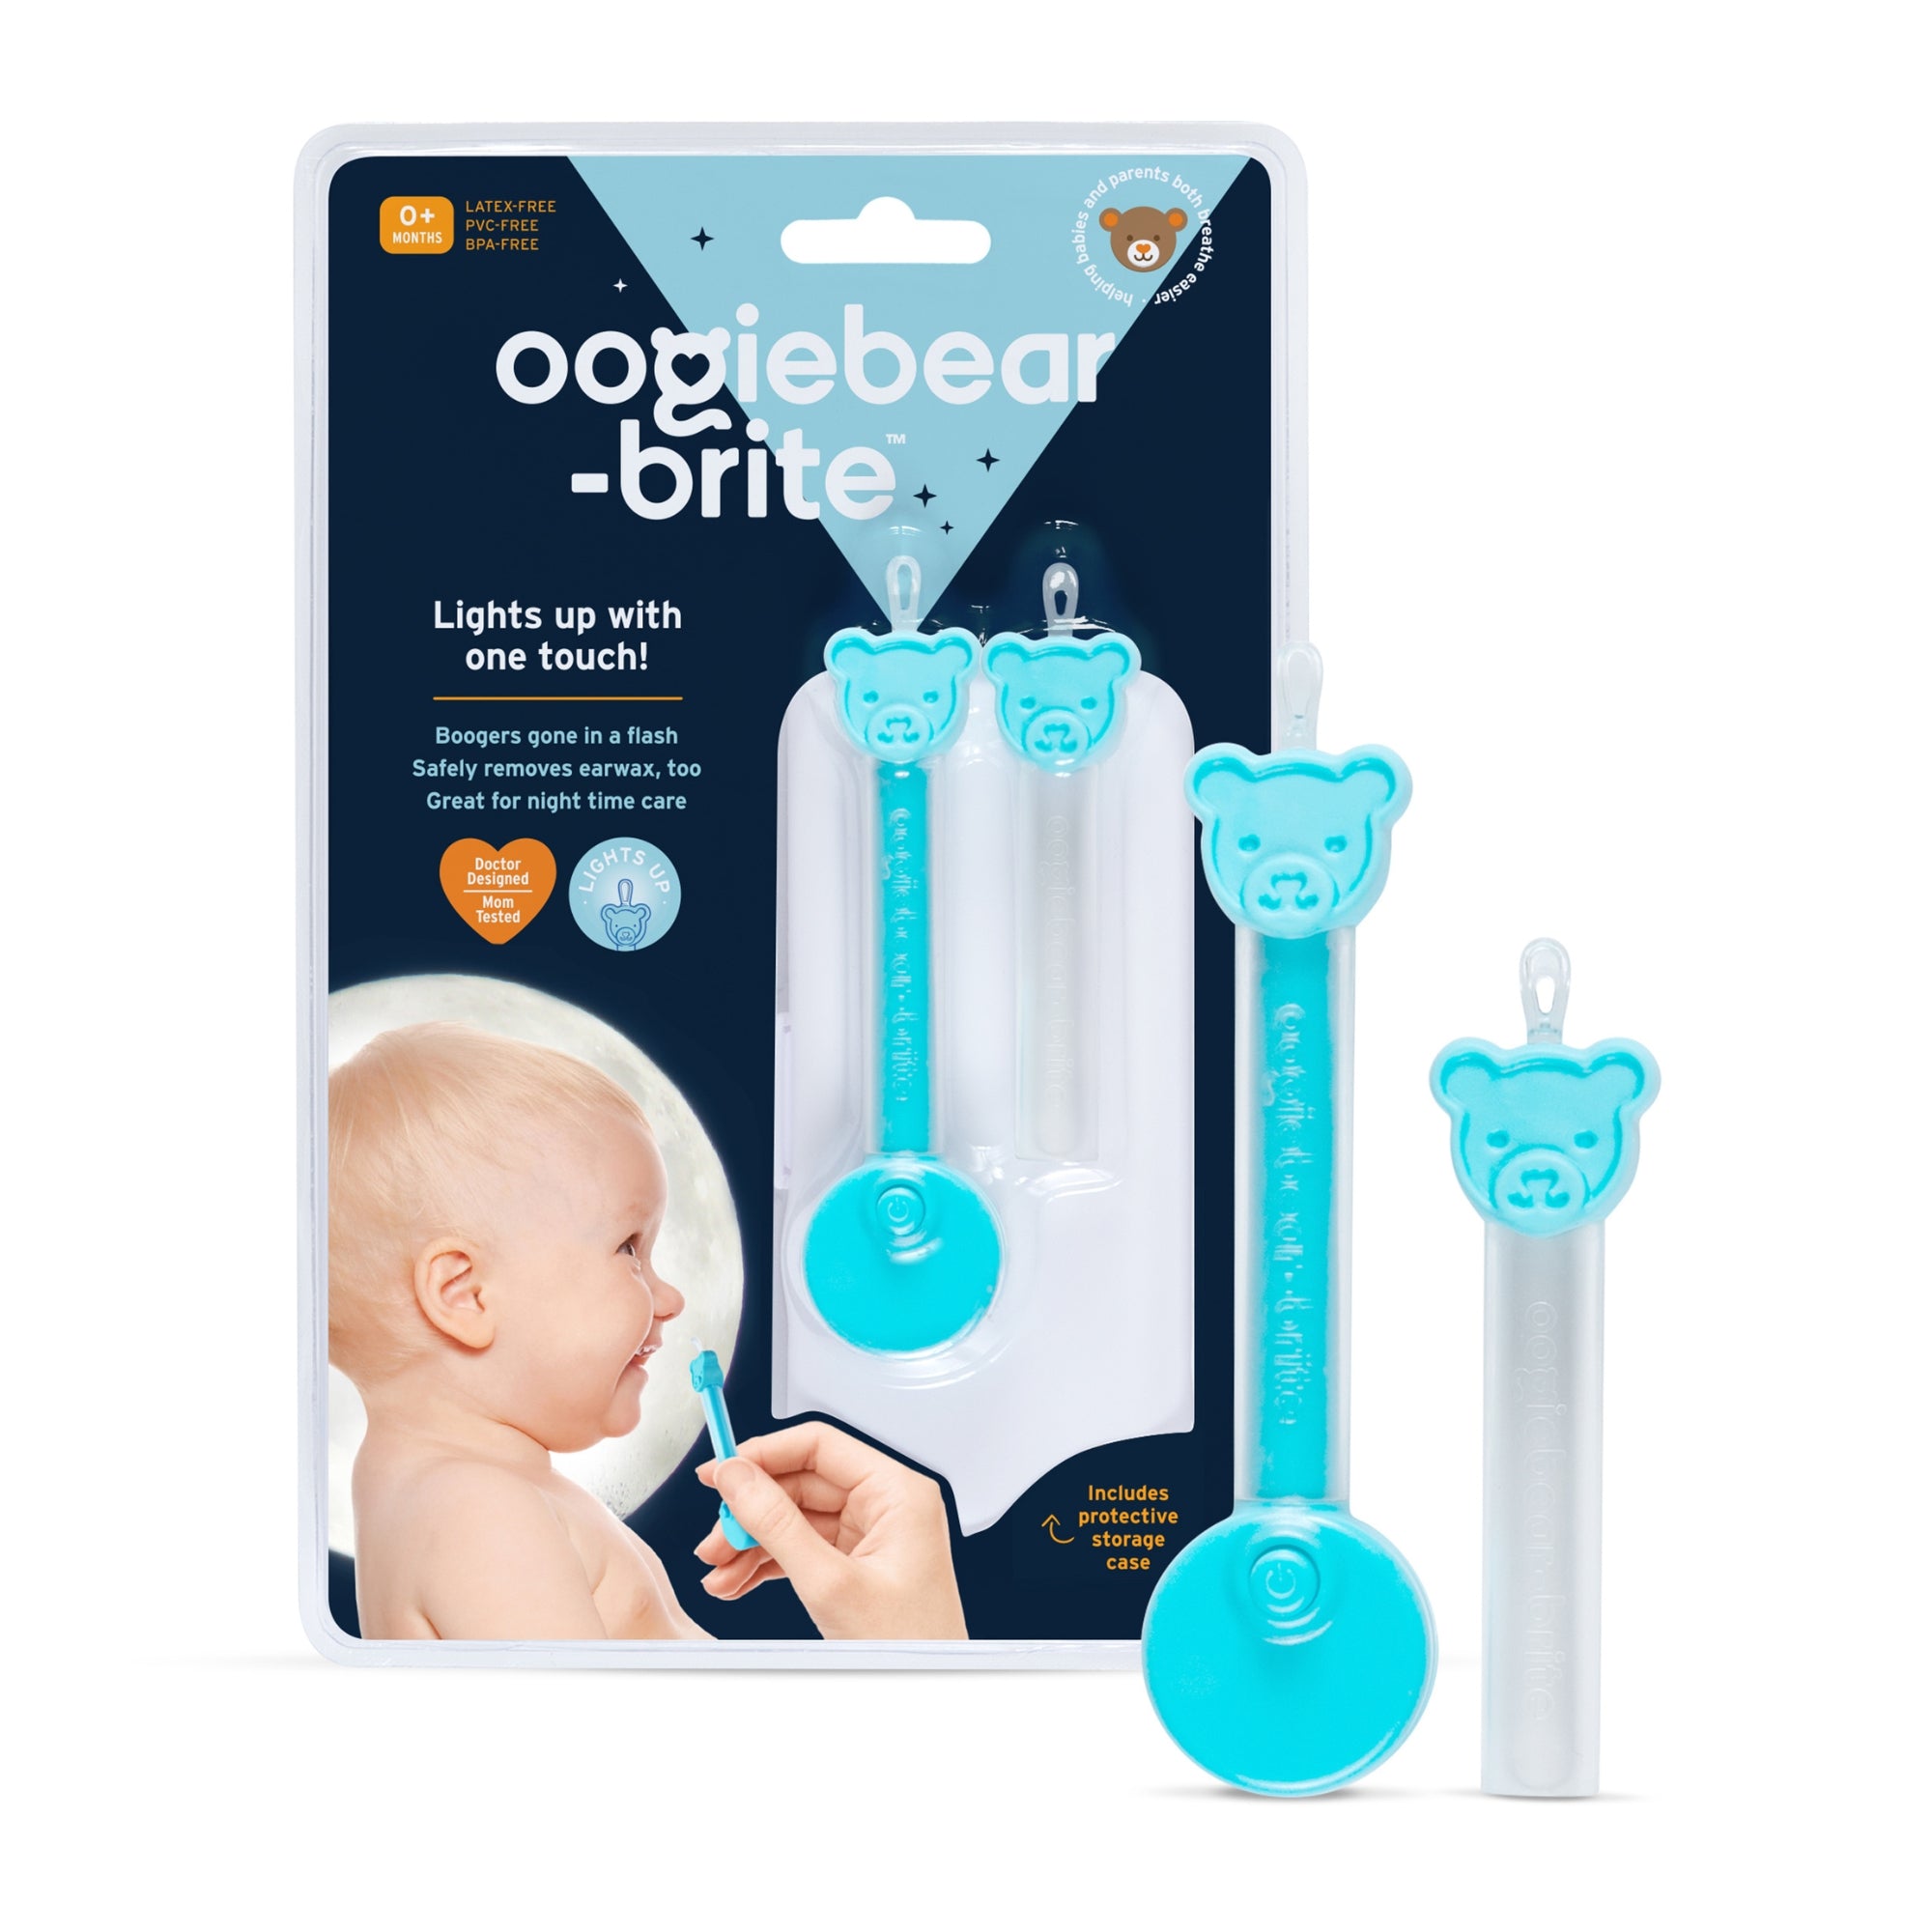  oogiebear Chest rub and Nose Balm - Gentle Infant Care kit with  a chestrub and nosebalm (0.2 Ounces Each) with Travel Pouch : Baby